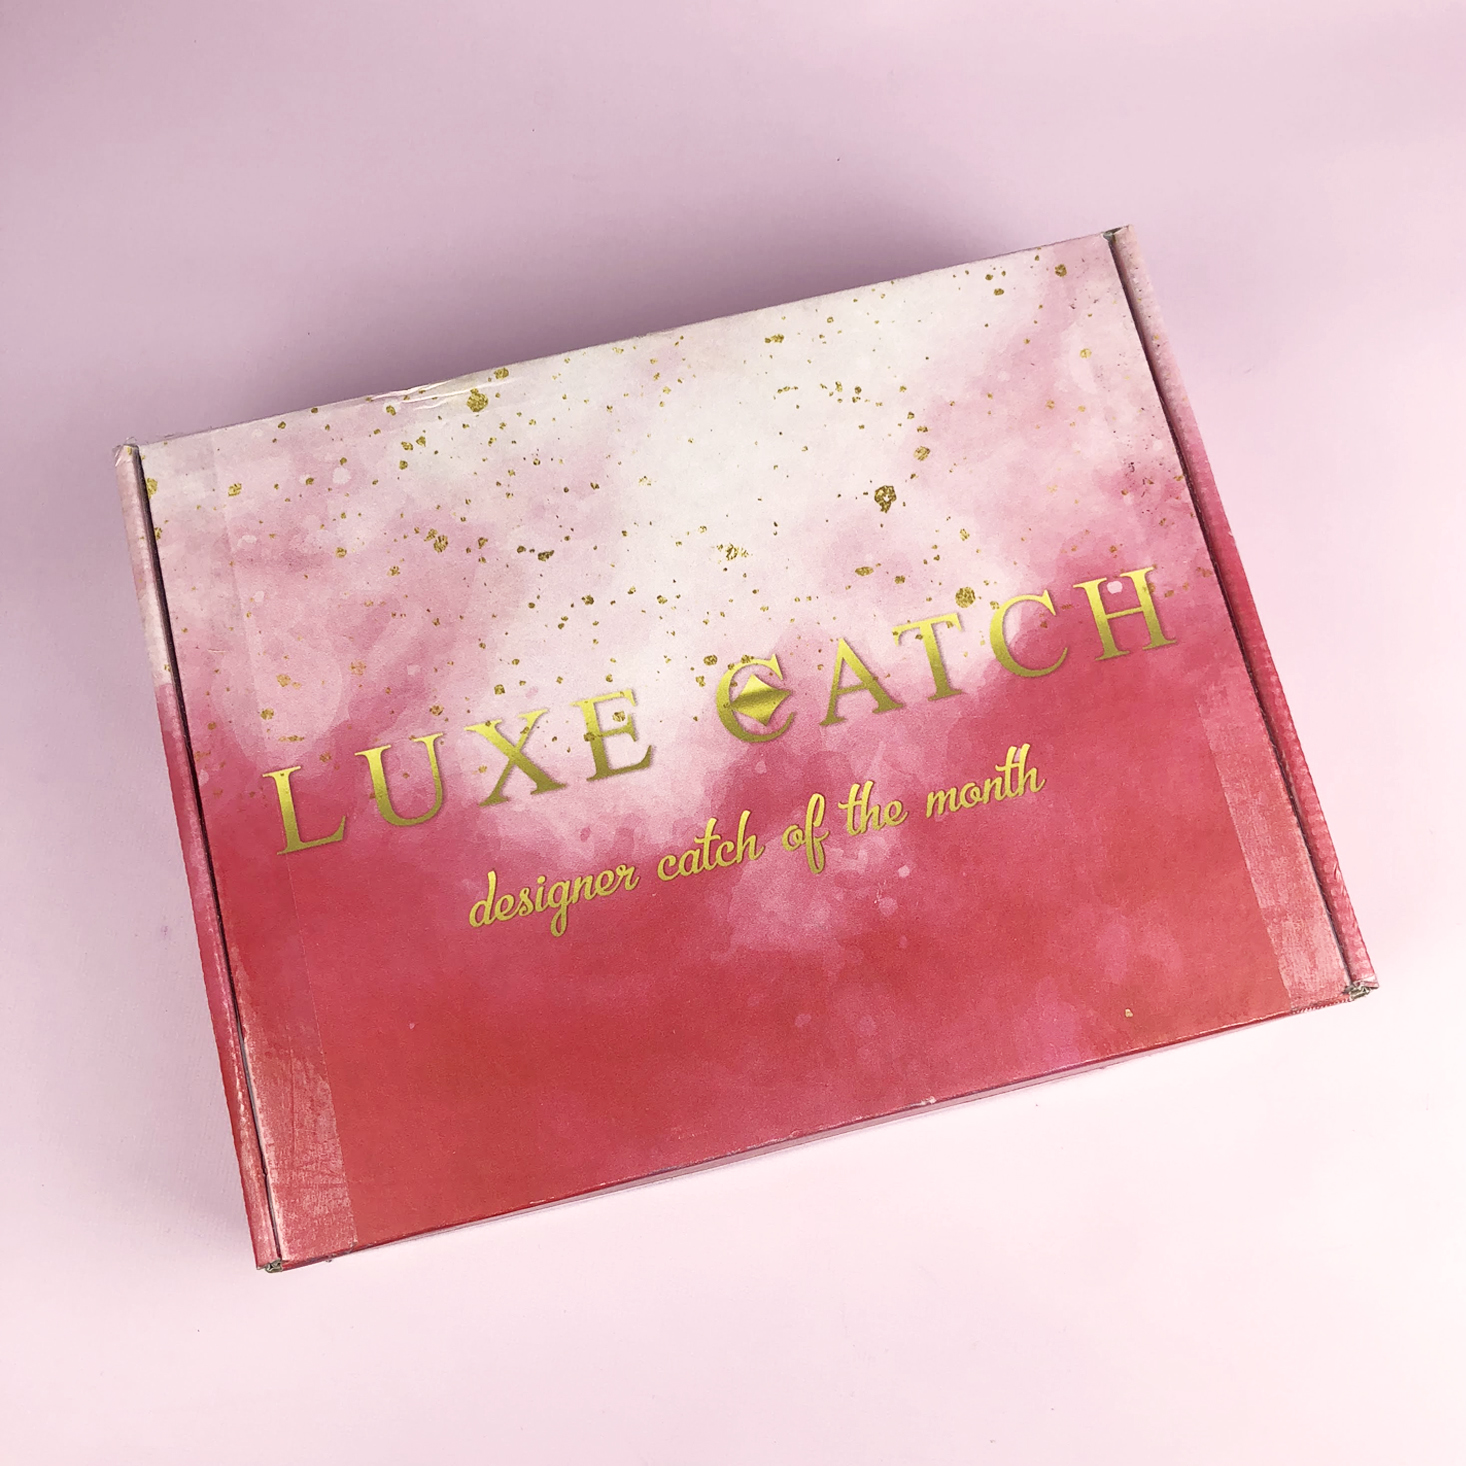 Luxe Catch Women’s Clothing Subscription Box Review + Coupon – August 2018